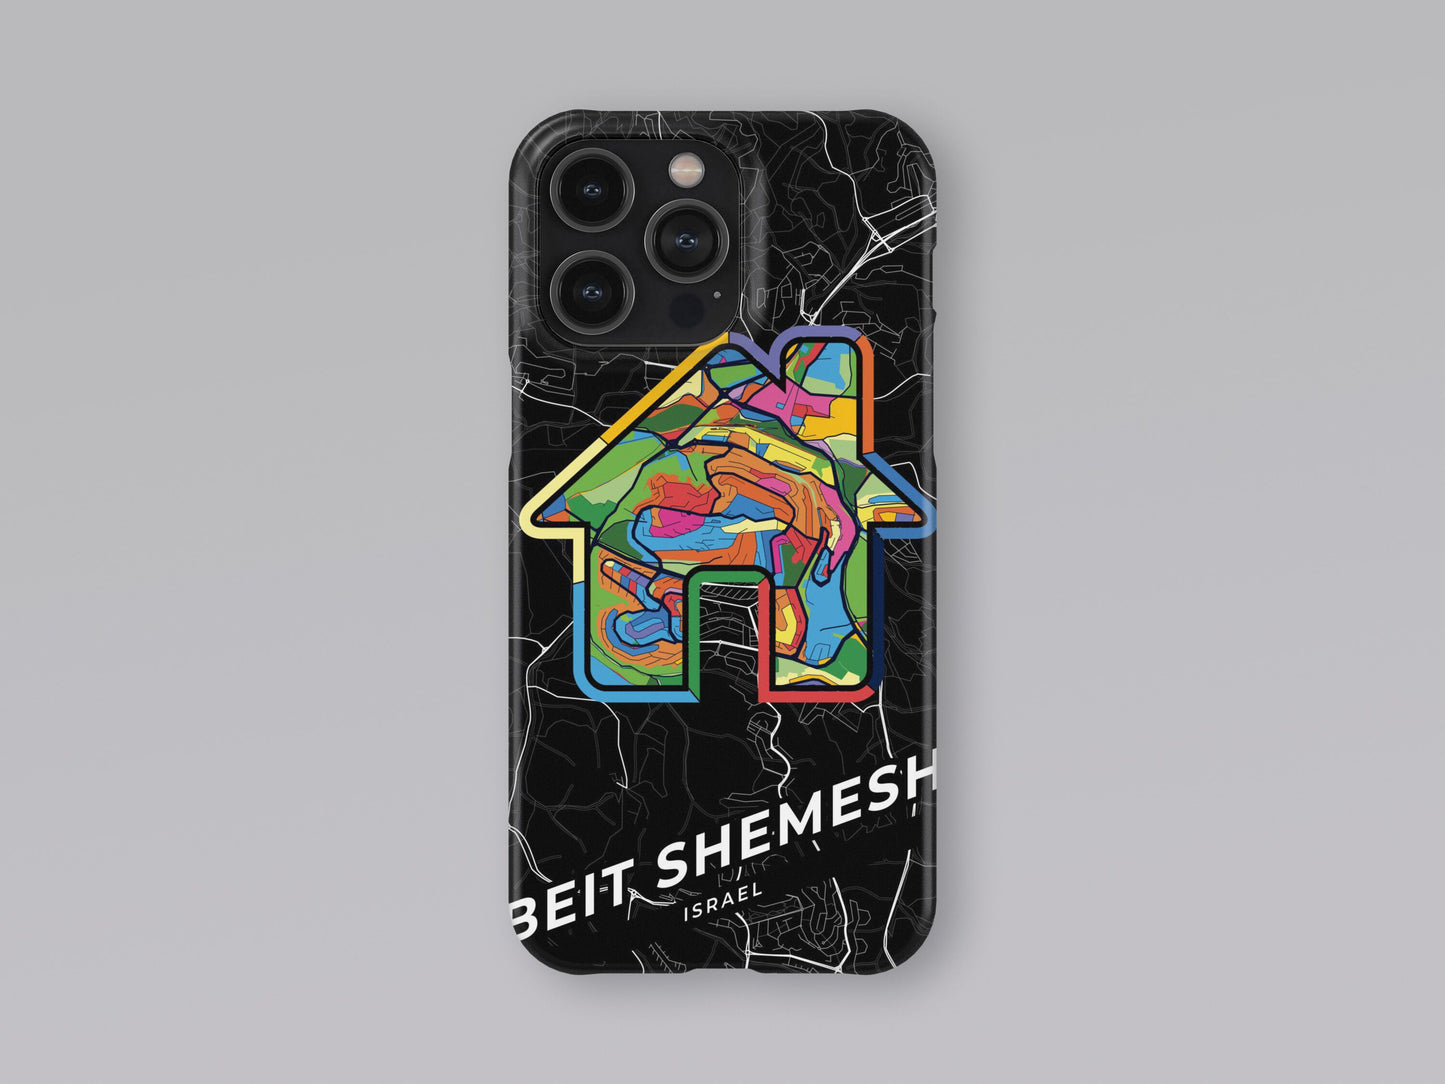 Beit Shemesh Israel slim phone case with colorful icon. Birthday, wedding or housewarming gift. Couple match cases. 3